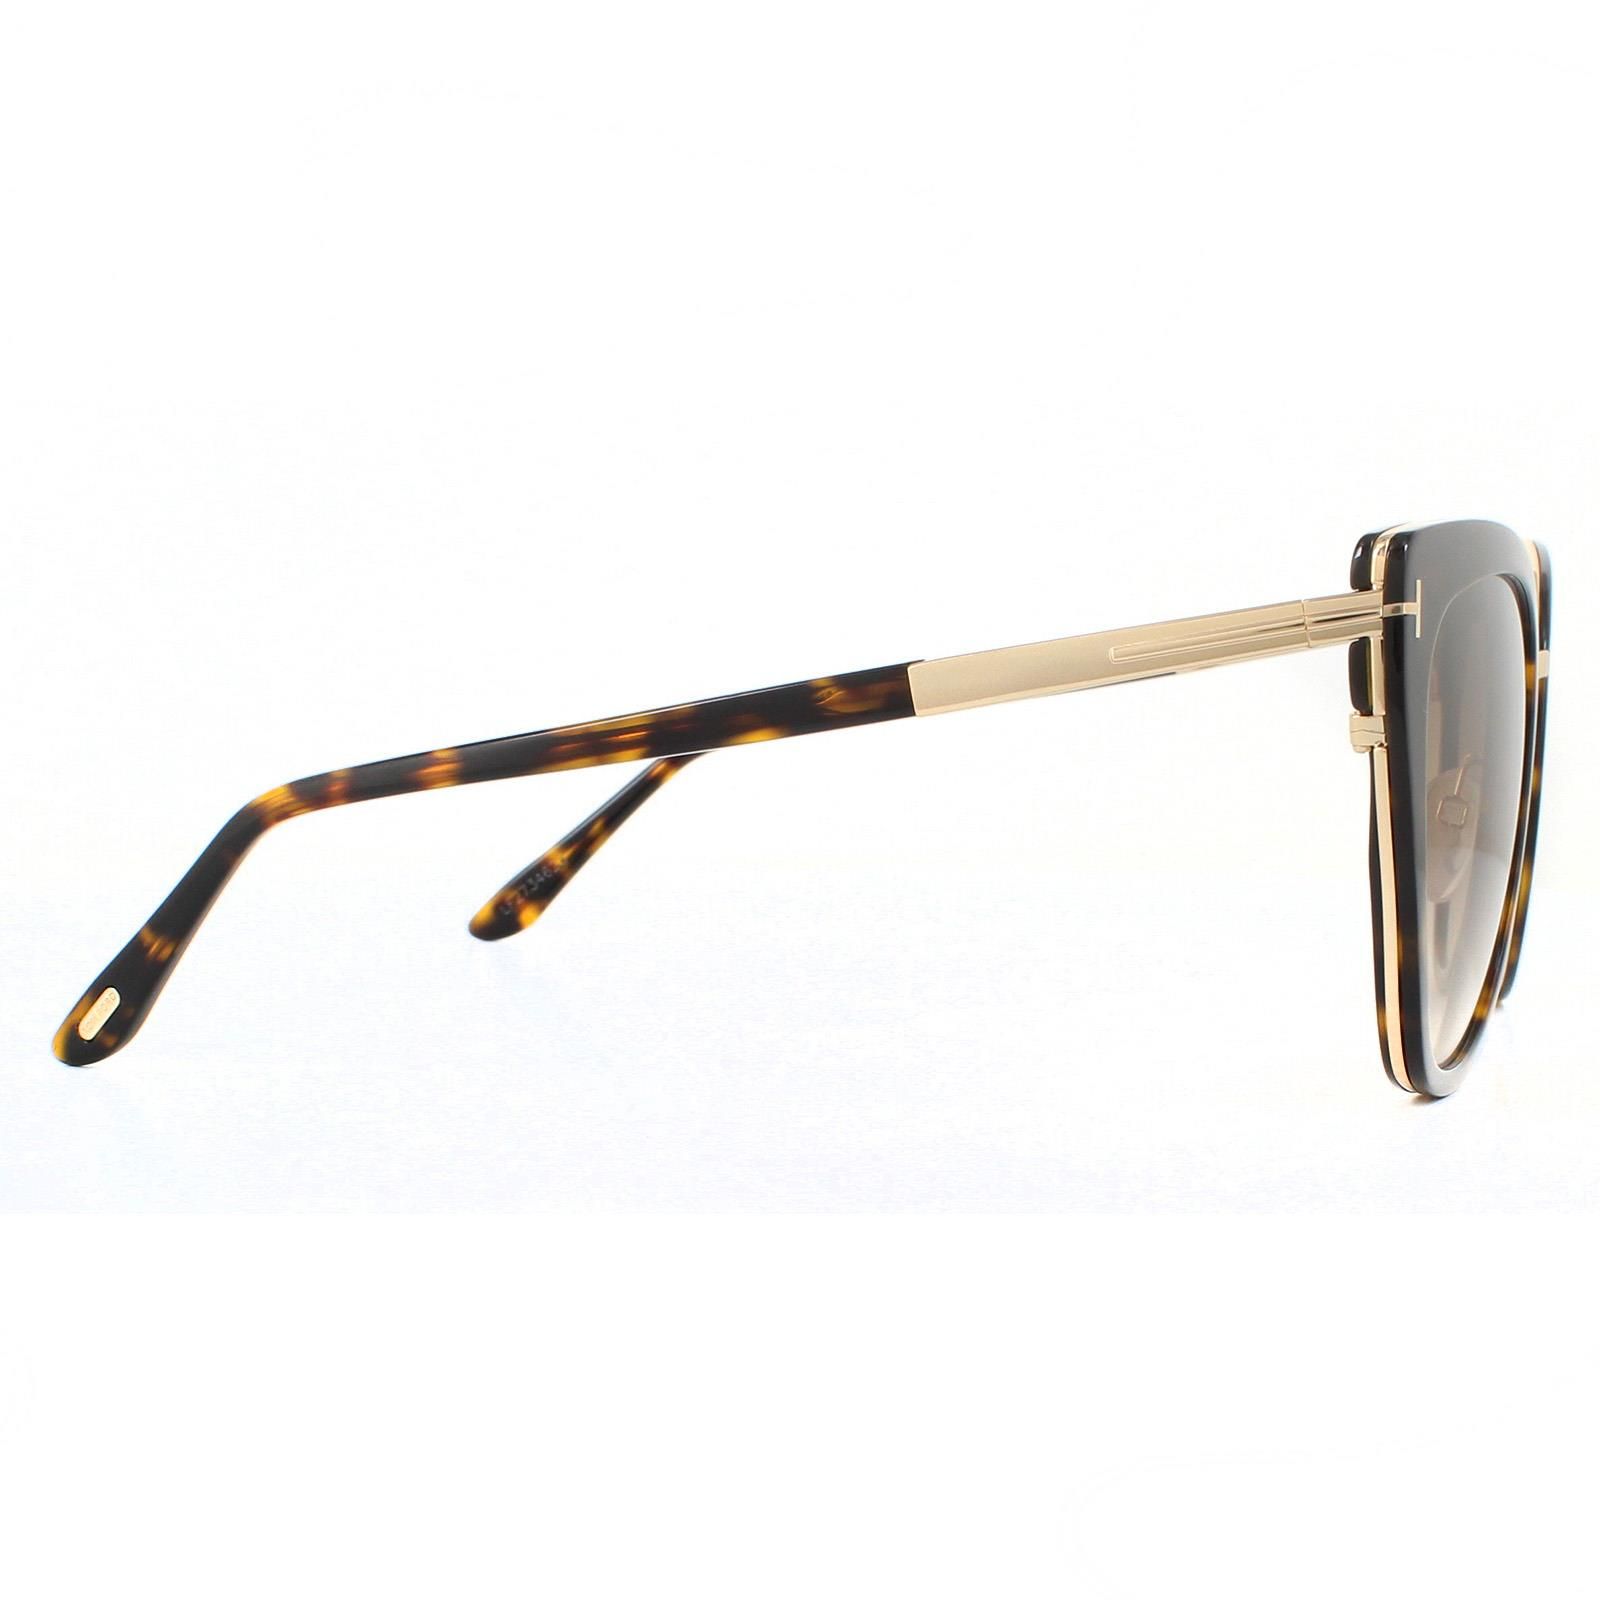 Tom Ford Sunglasses Simona FT0717 52F Shiny Dark Havana Brown Gradient are an elegant cat eye design with a plastic frame front and matching temple tips. Signature Tom Ford T logos wrap around the outer corners and along the temples.